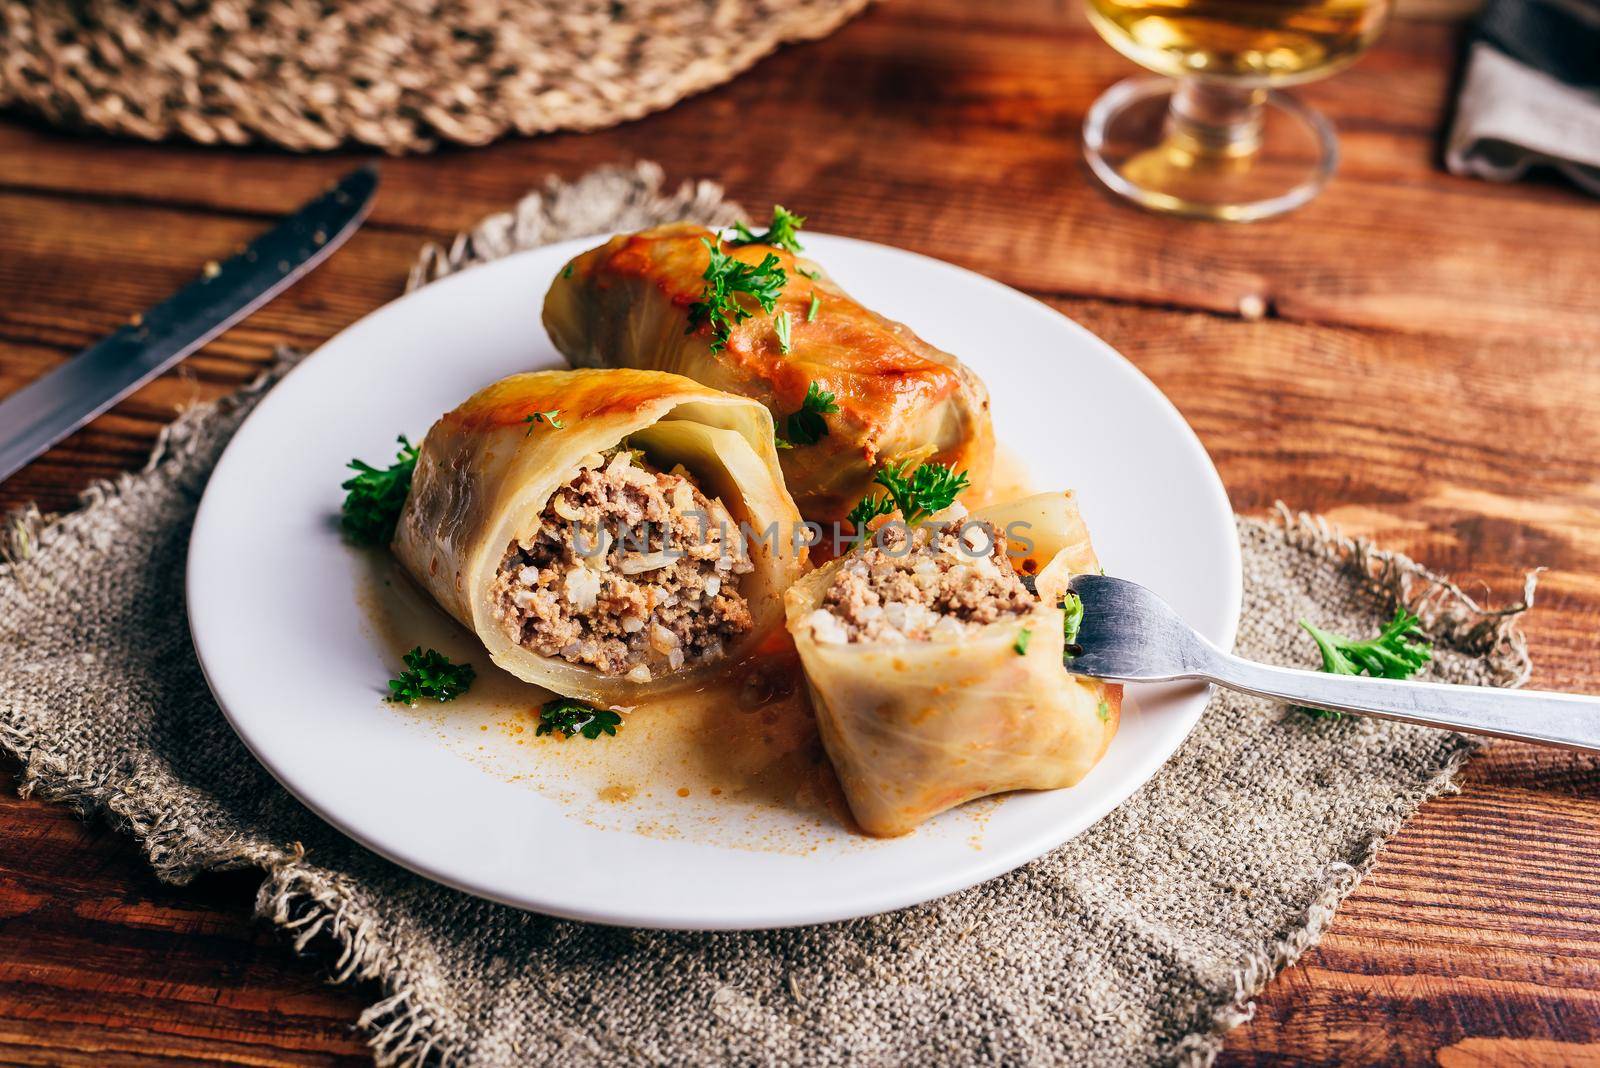 Sliced Cabbage Rolls Stuffed with Minced Beef and Rice by Seva_blsv